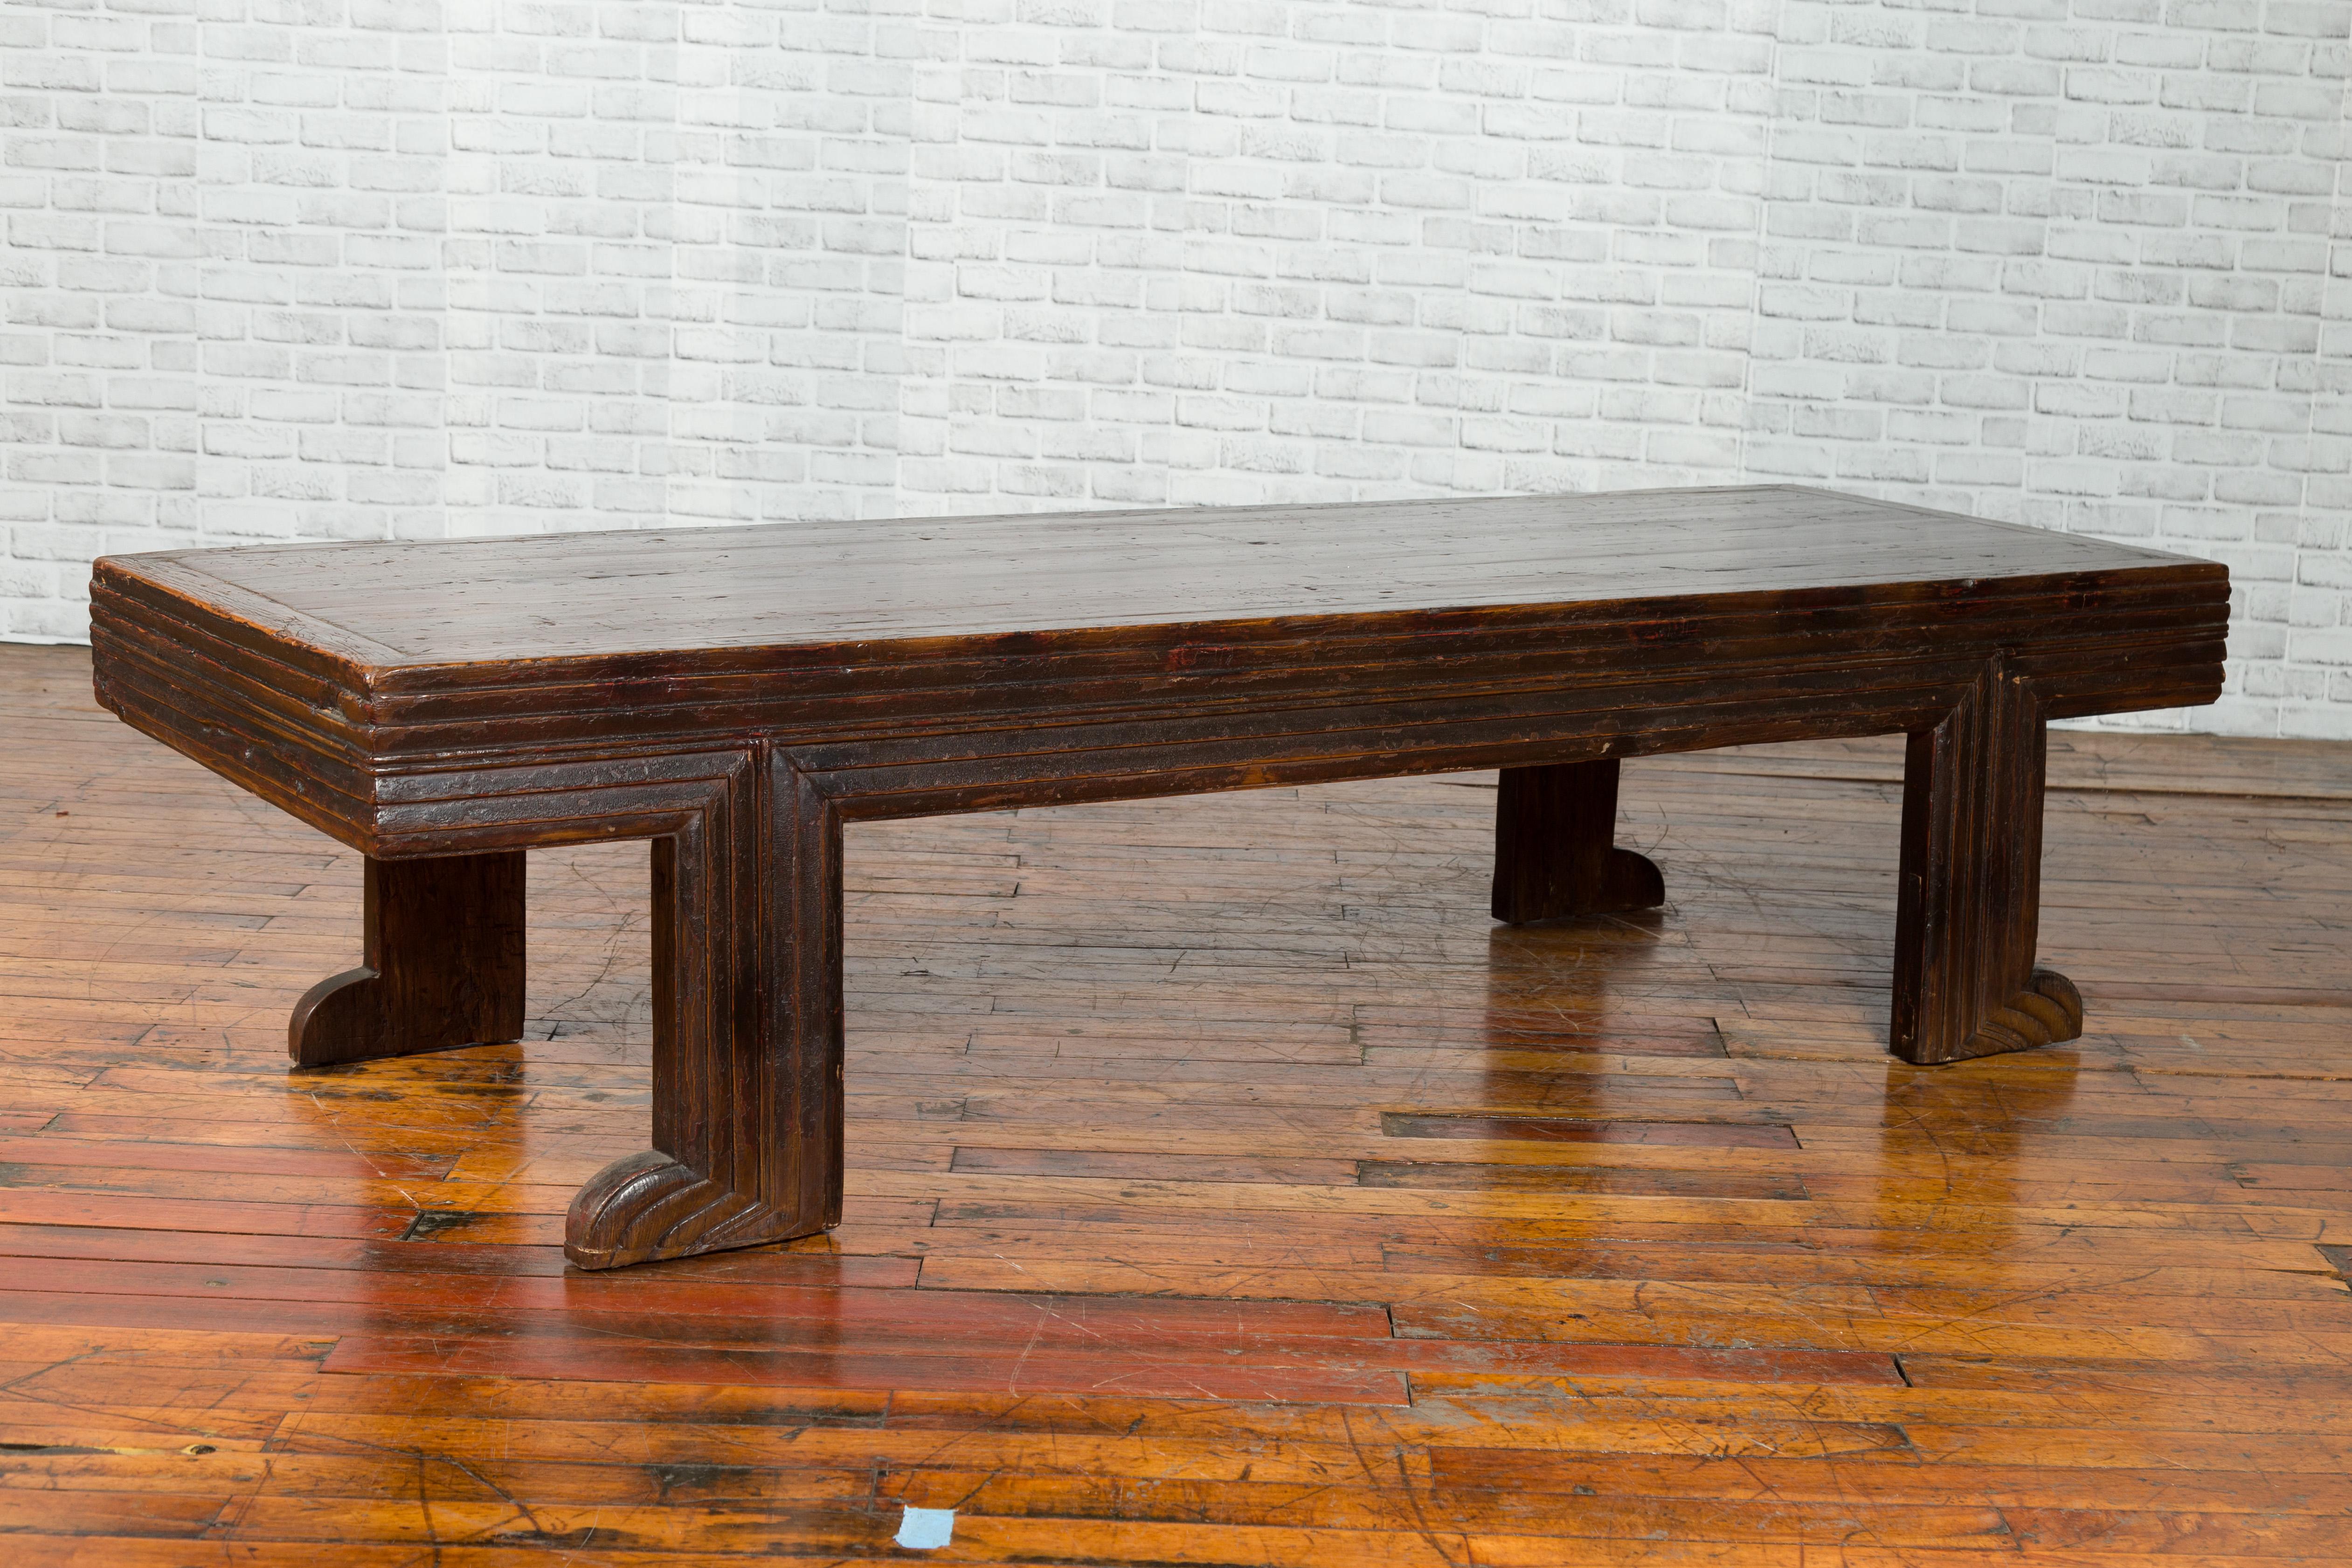 A long Chinese Qing dynasty period fine elmwood coffee table from the 19th century with unusual recessed legs and reeded apron. This antique long table comes from China, where it was made during the 19th century with fine elmwood. The Chinese didn't